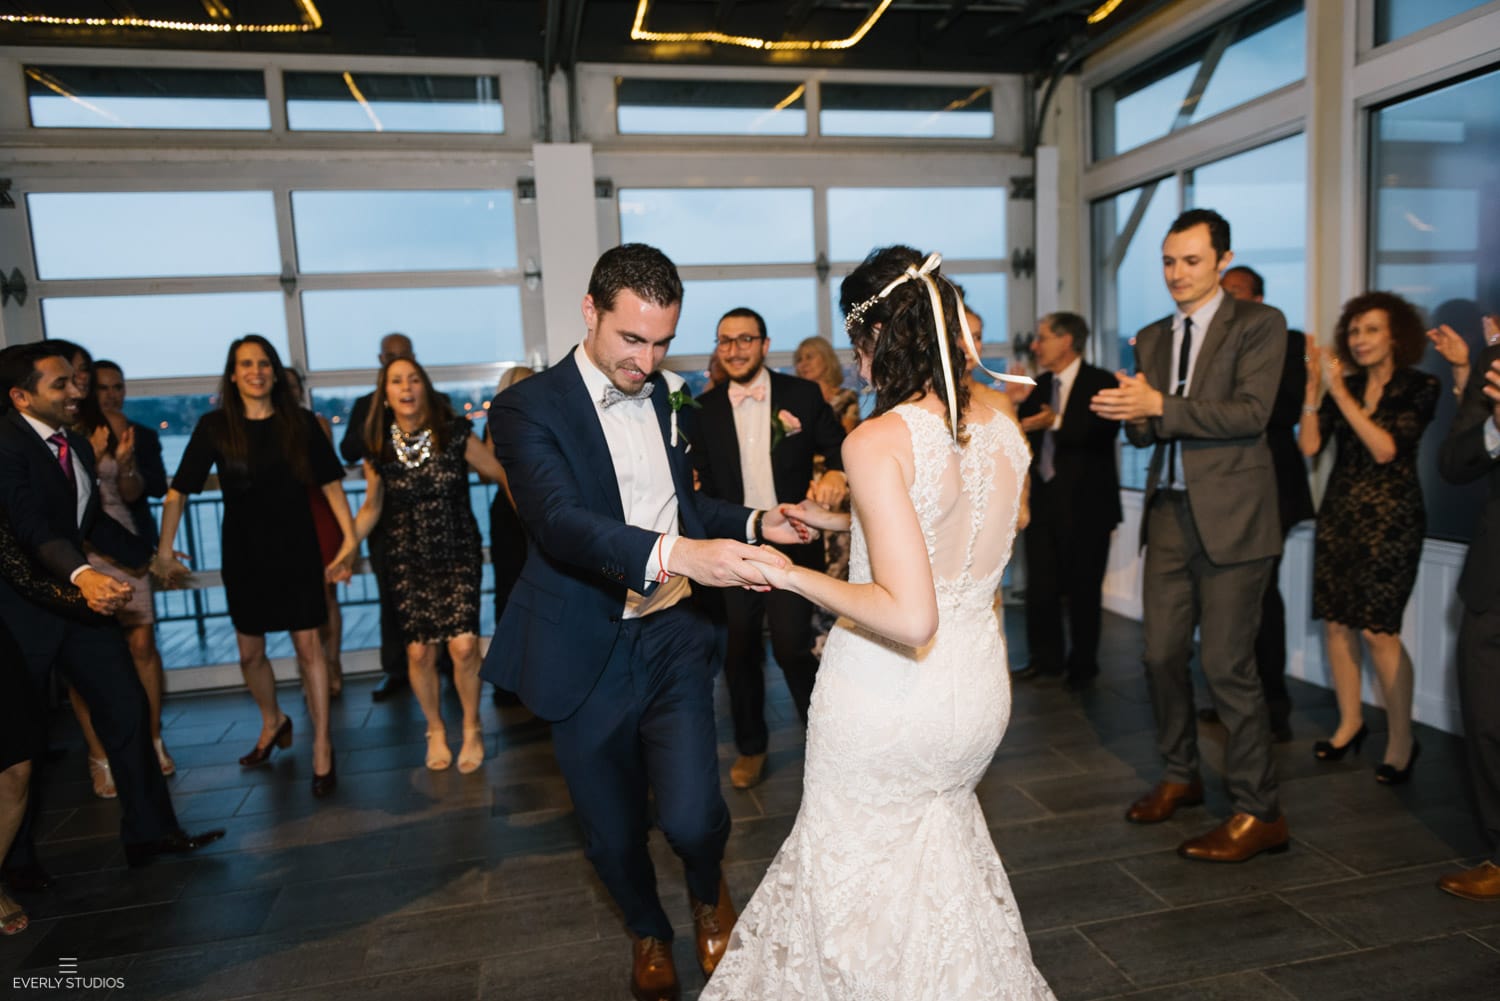 Chelsea Piers Sunset Terrace wedding reception in NYC